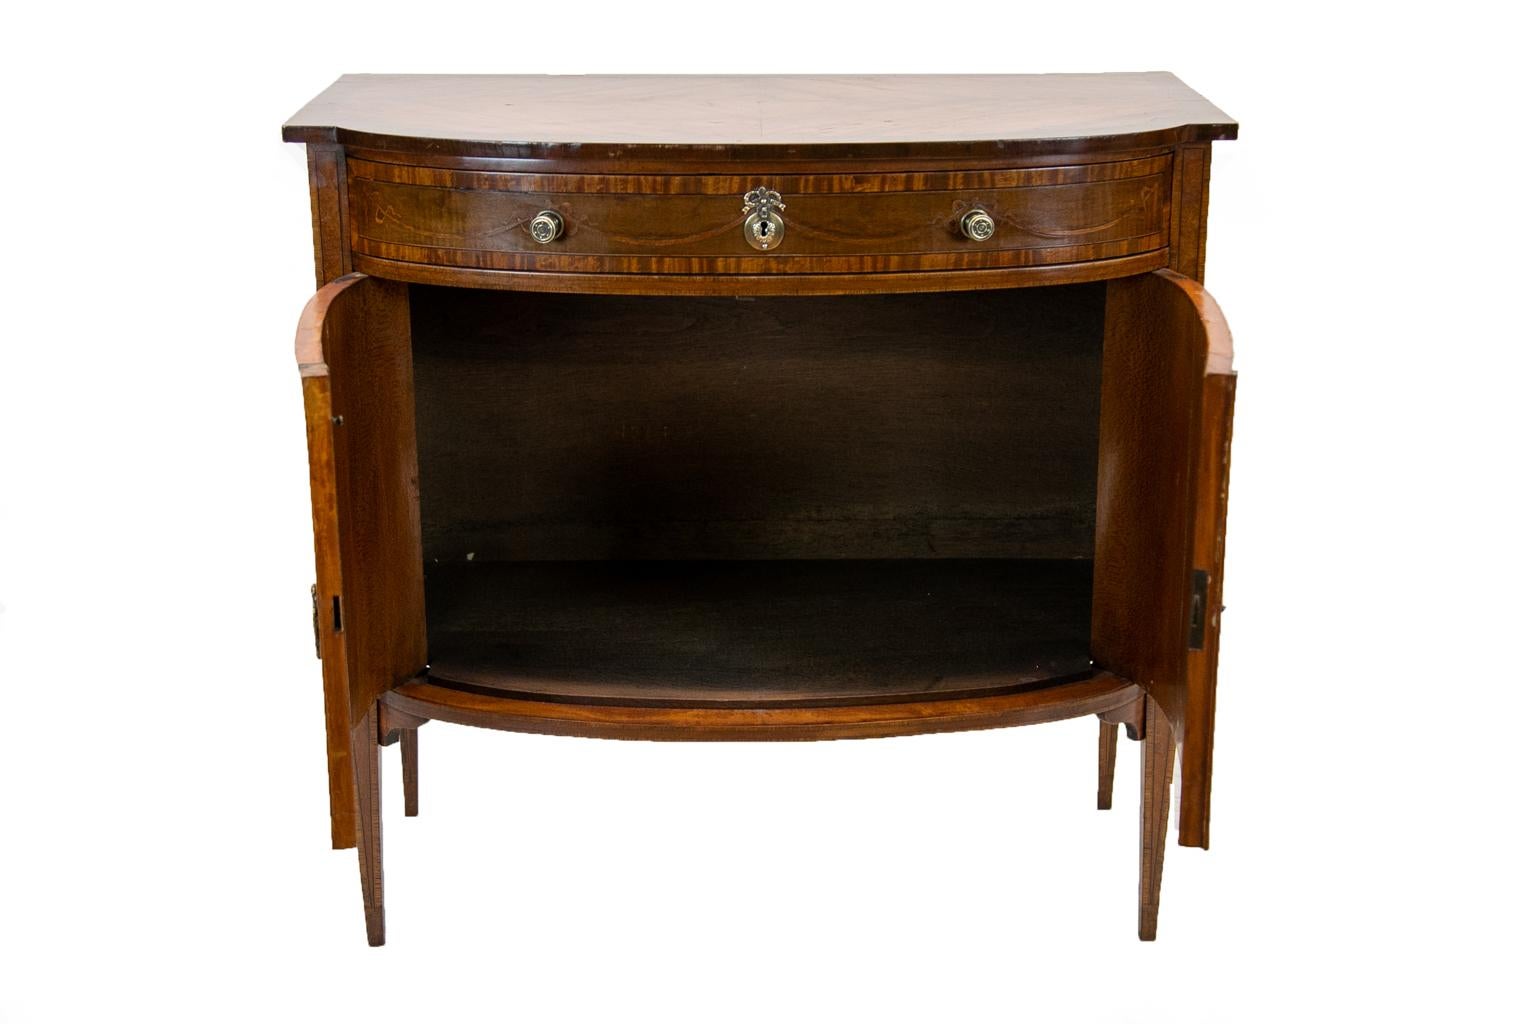 Early 20th Century English Satinwood Console Cabinet